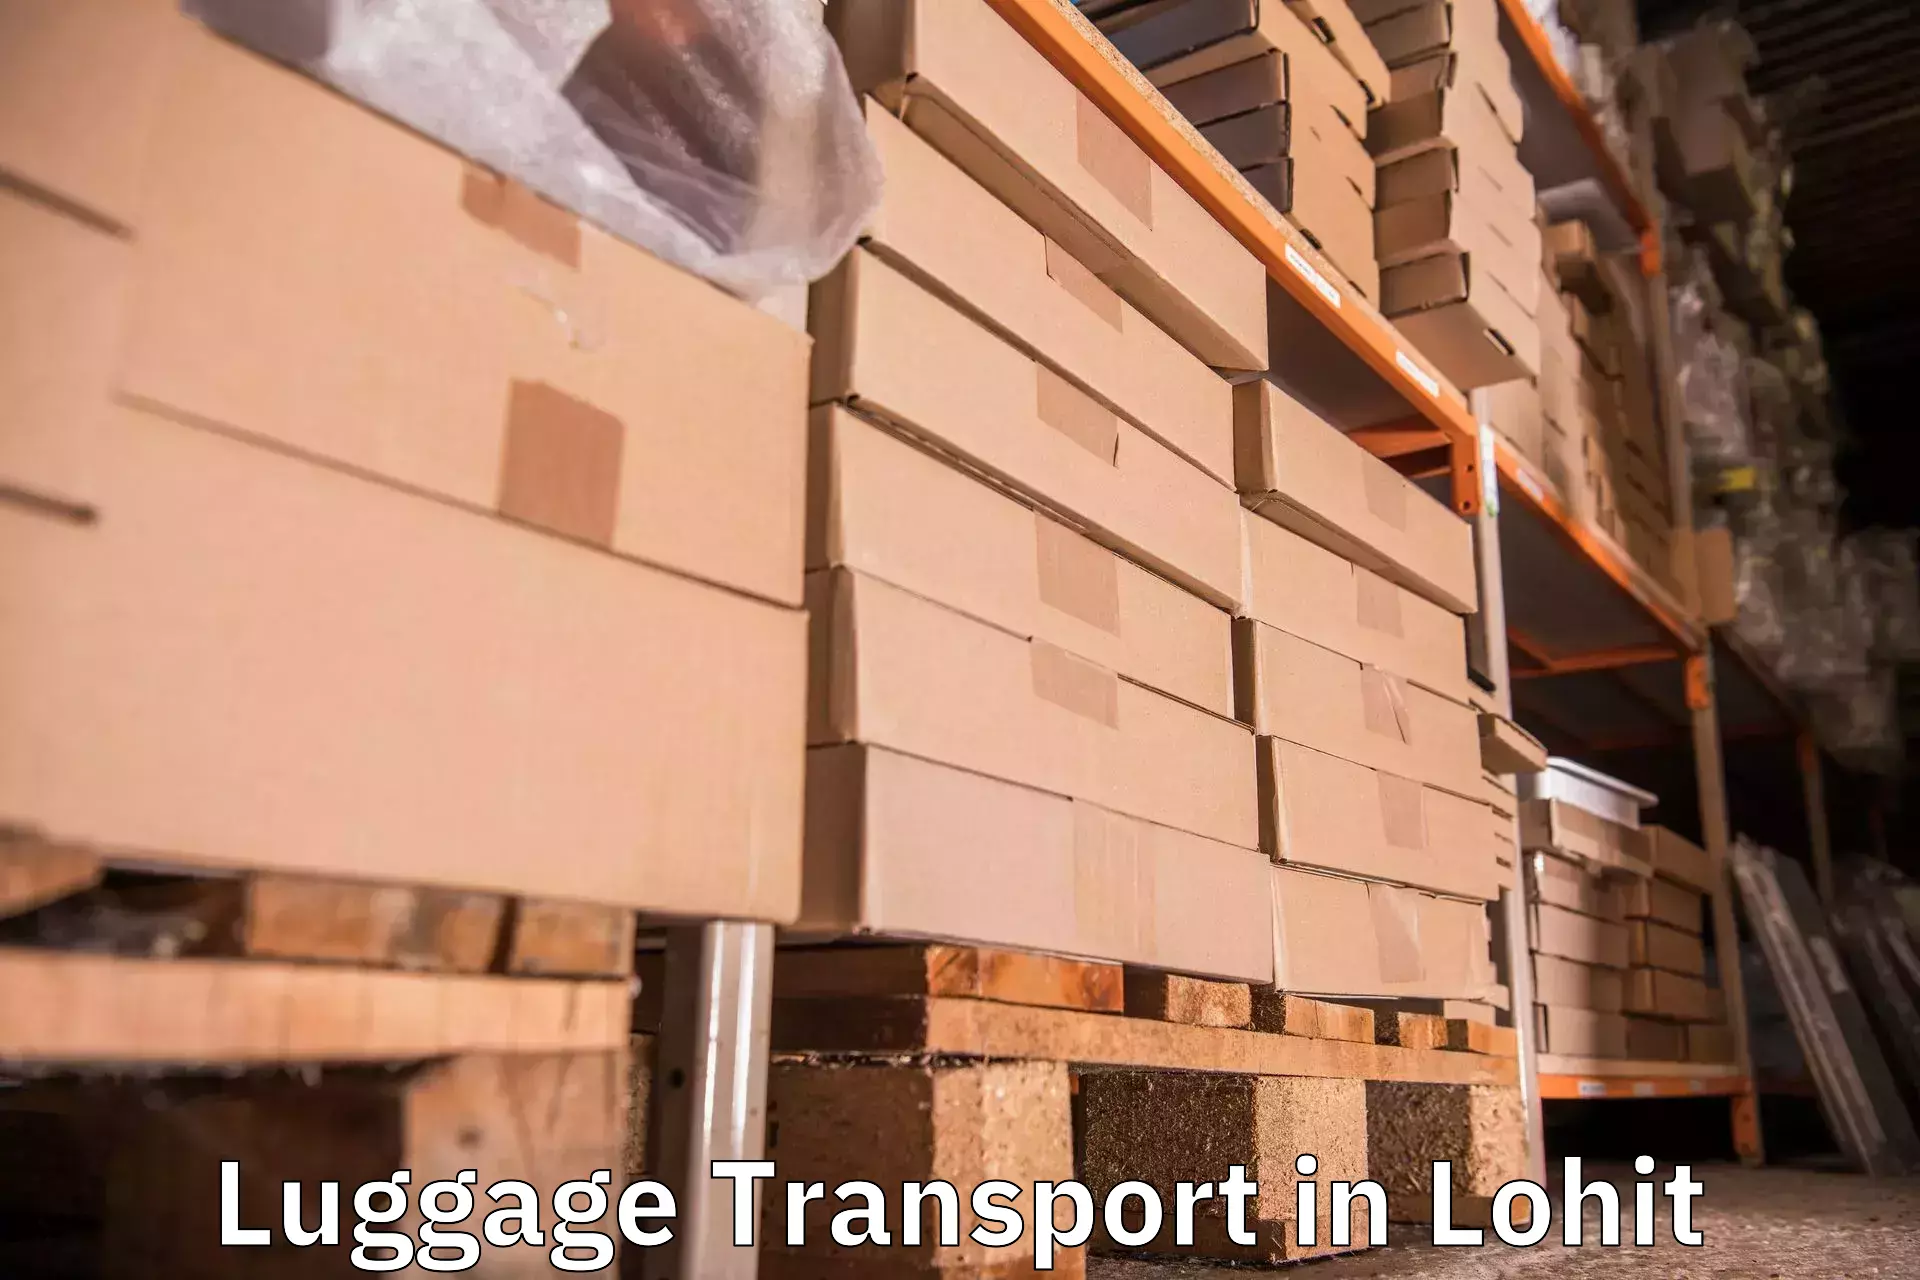 Baggage transport network in Lohit